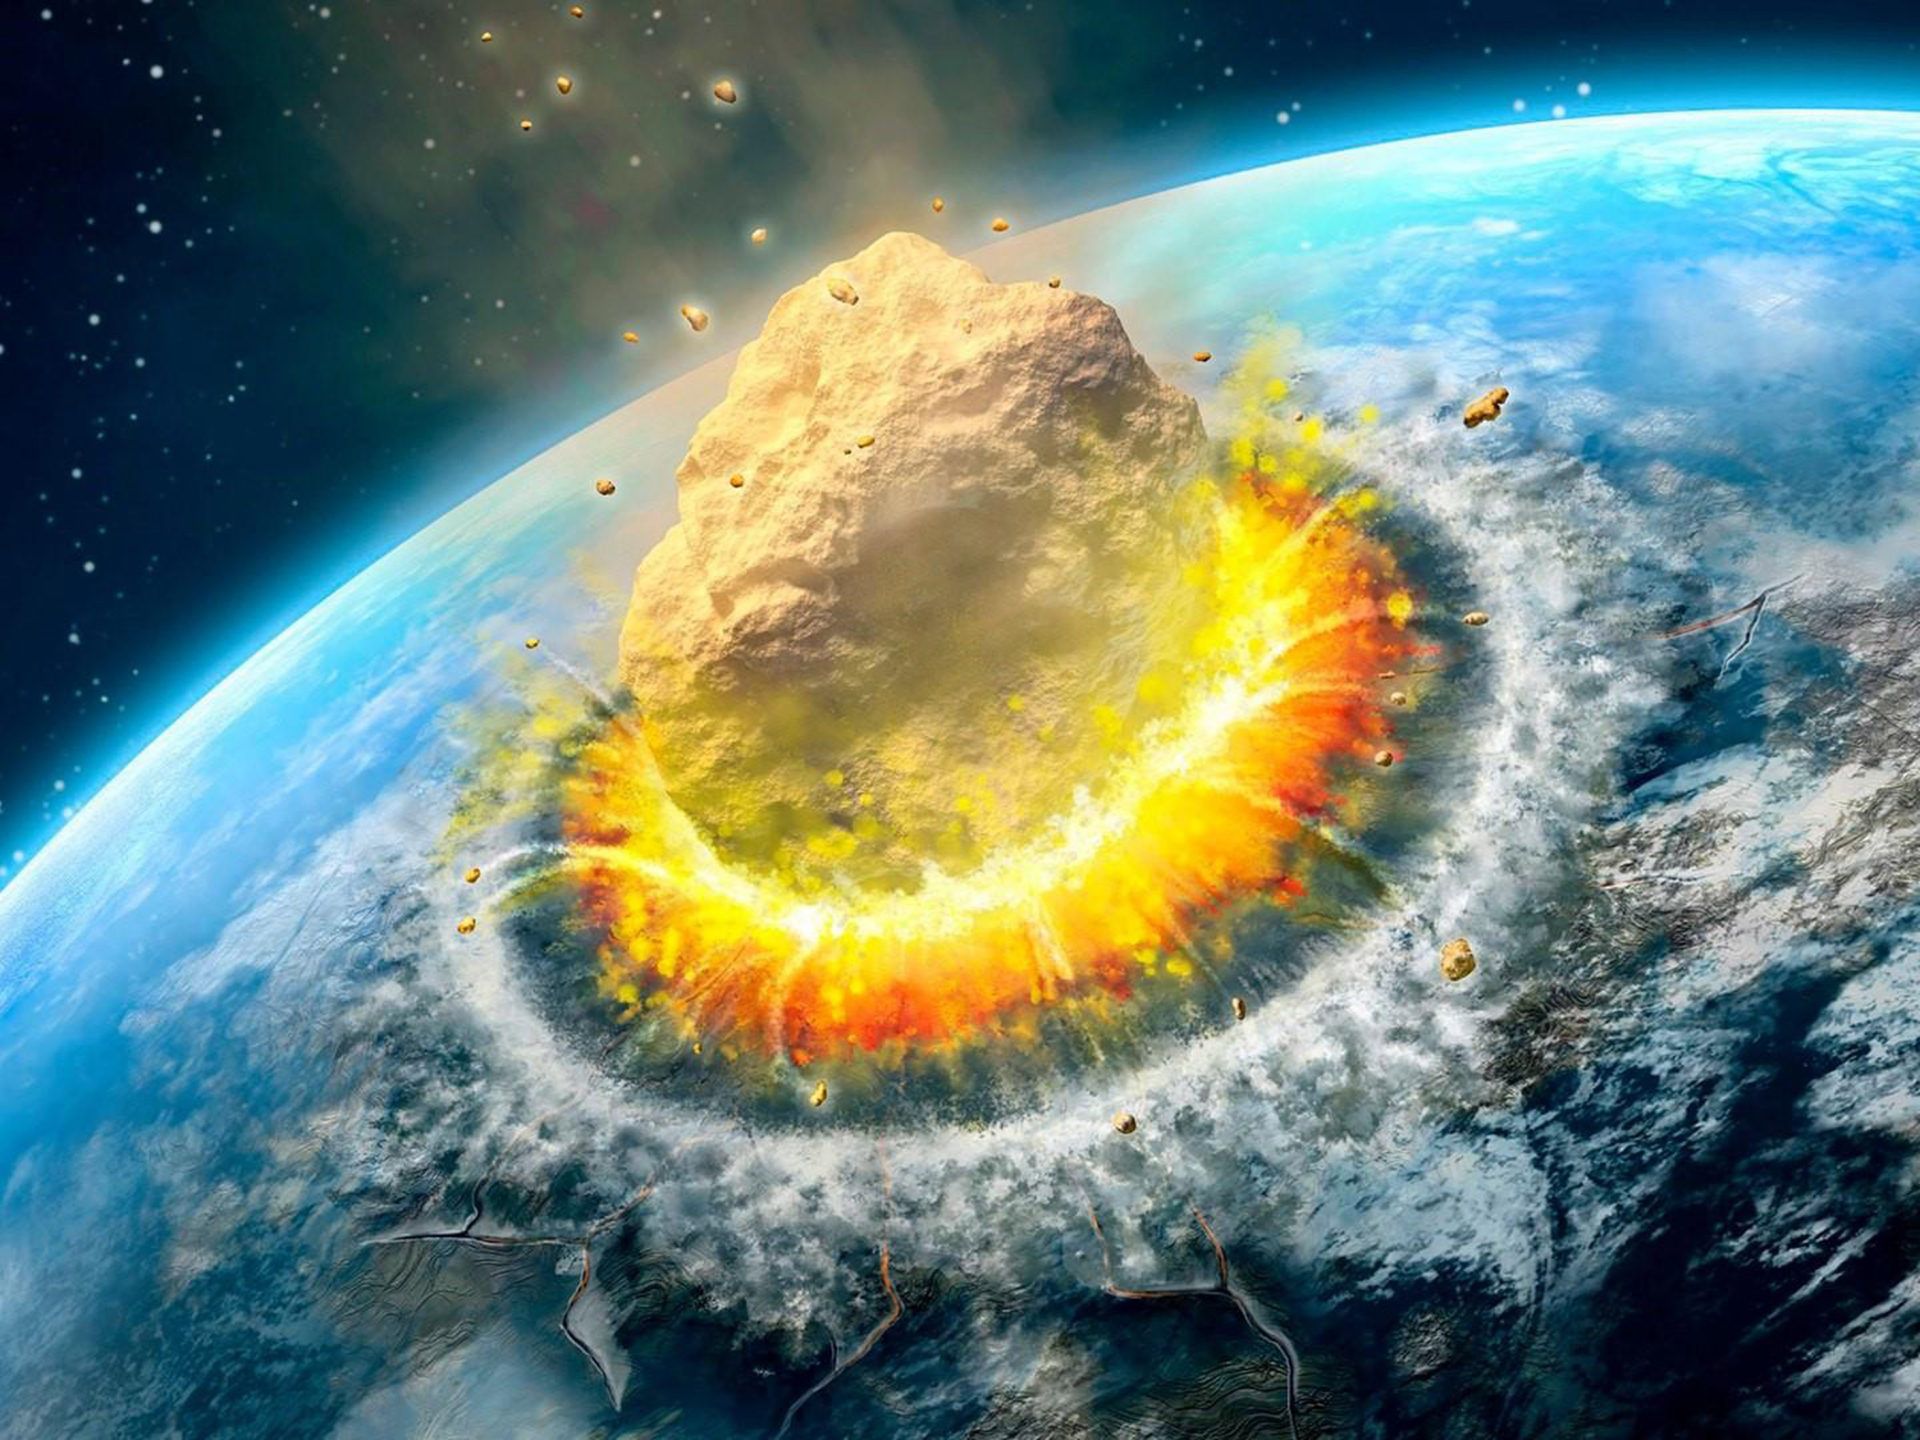 Asteroid Impact Falling Asteroid On Earth Ultra HD Background